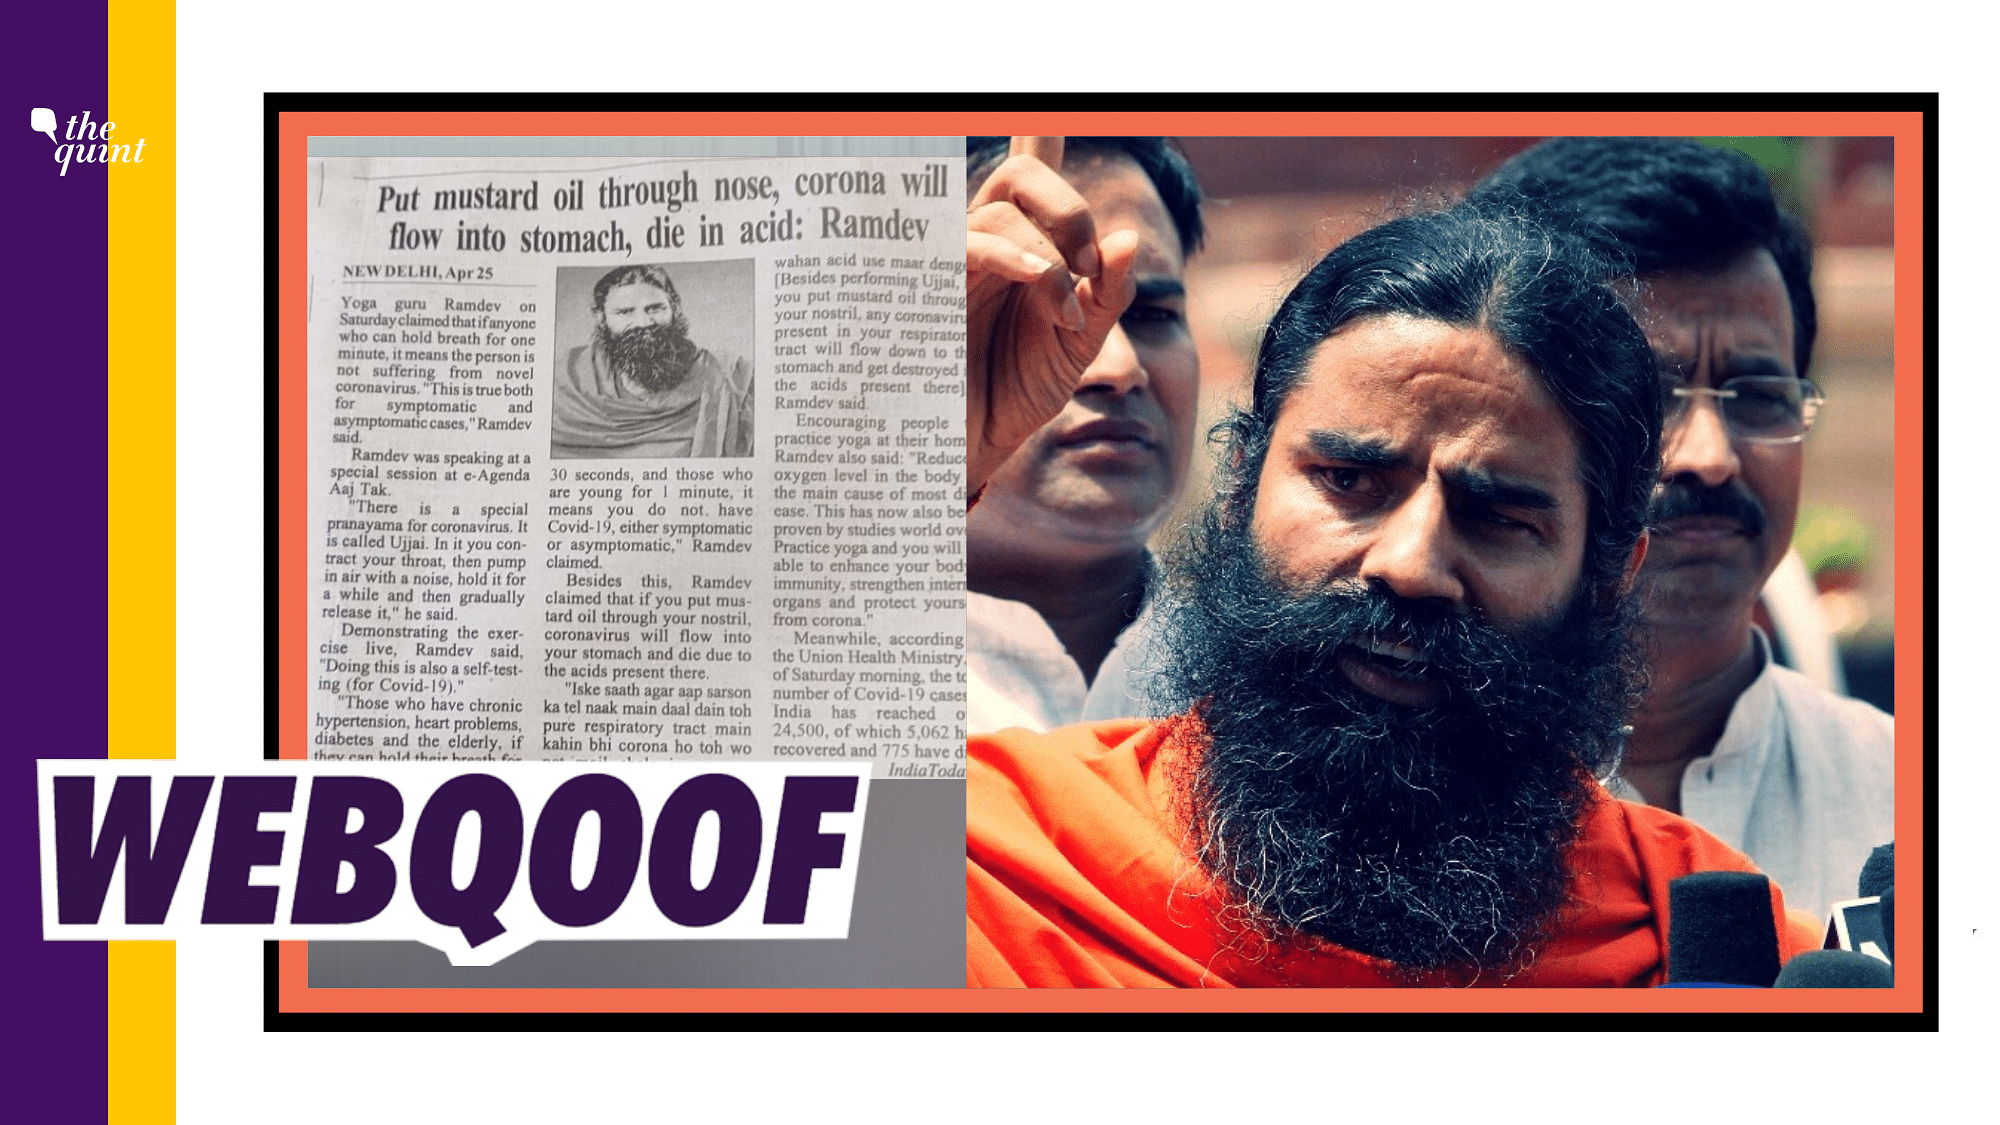 Baba Ramdev was speaking at a special session at e-Agenda Aaj Tak on Saturday where he made these claims.